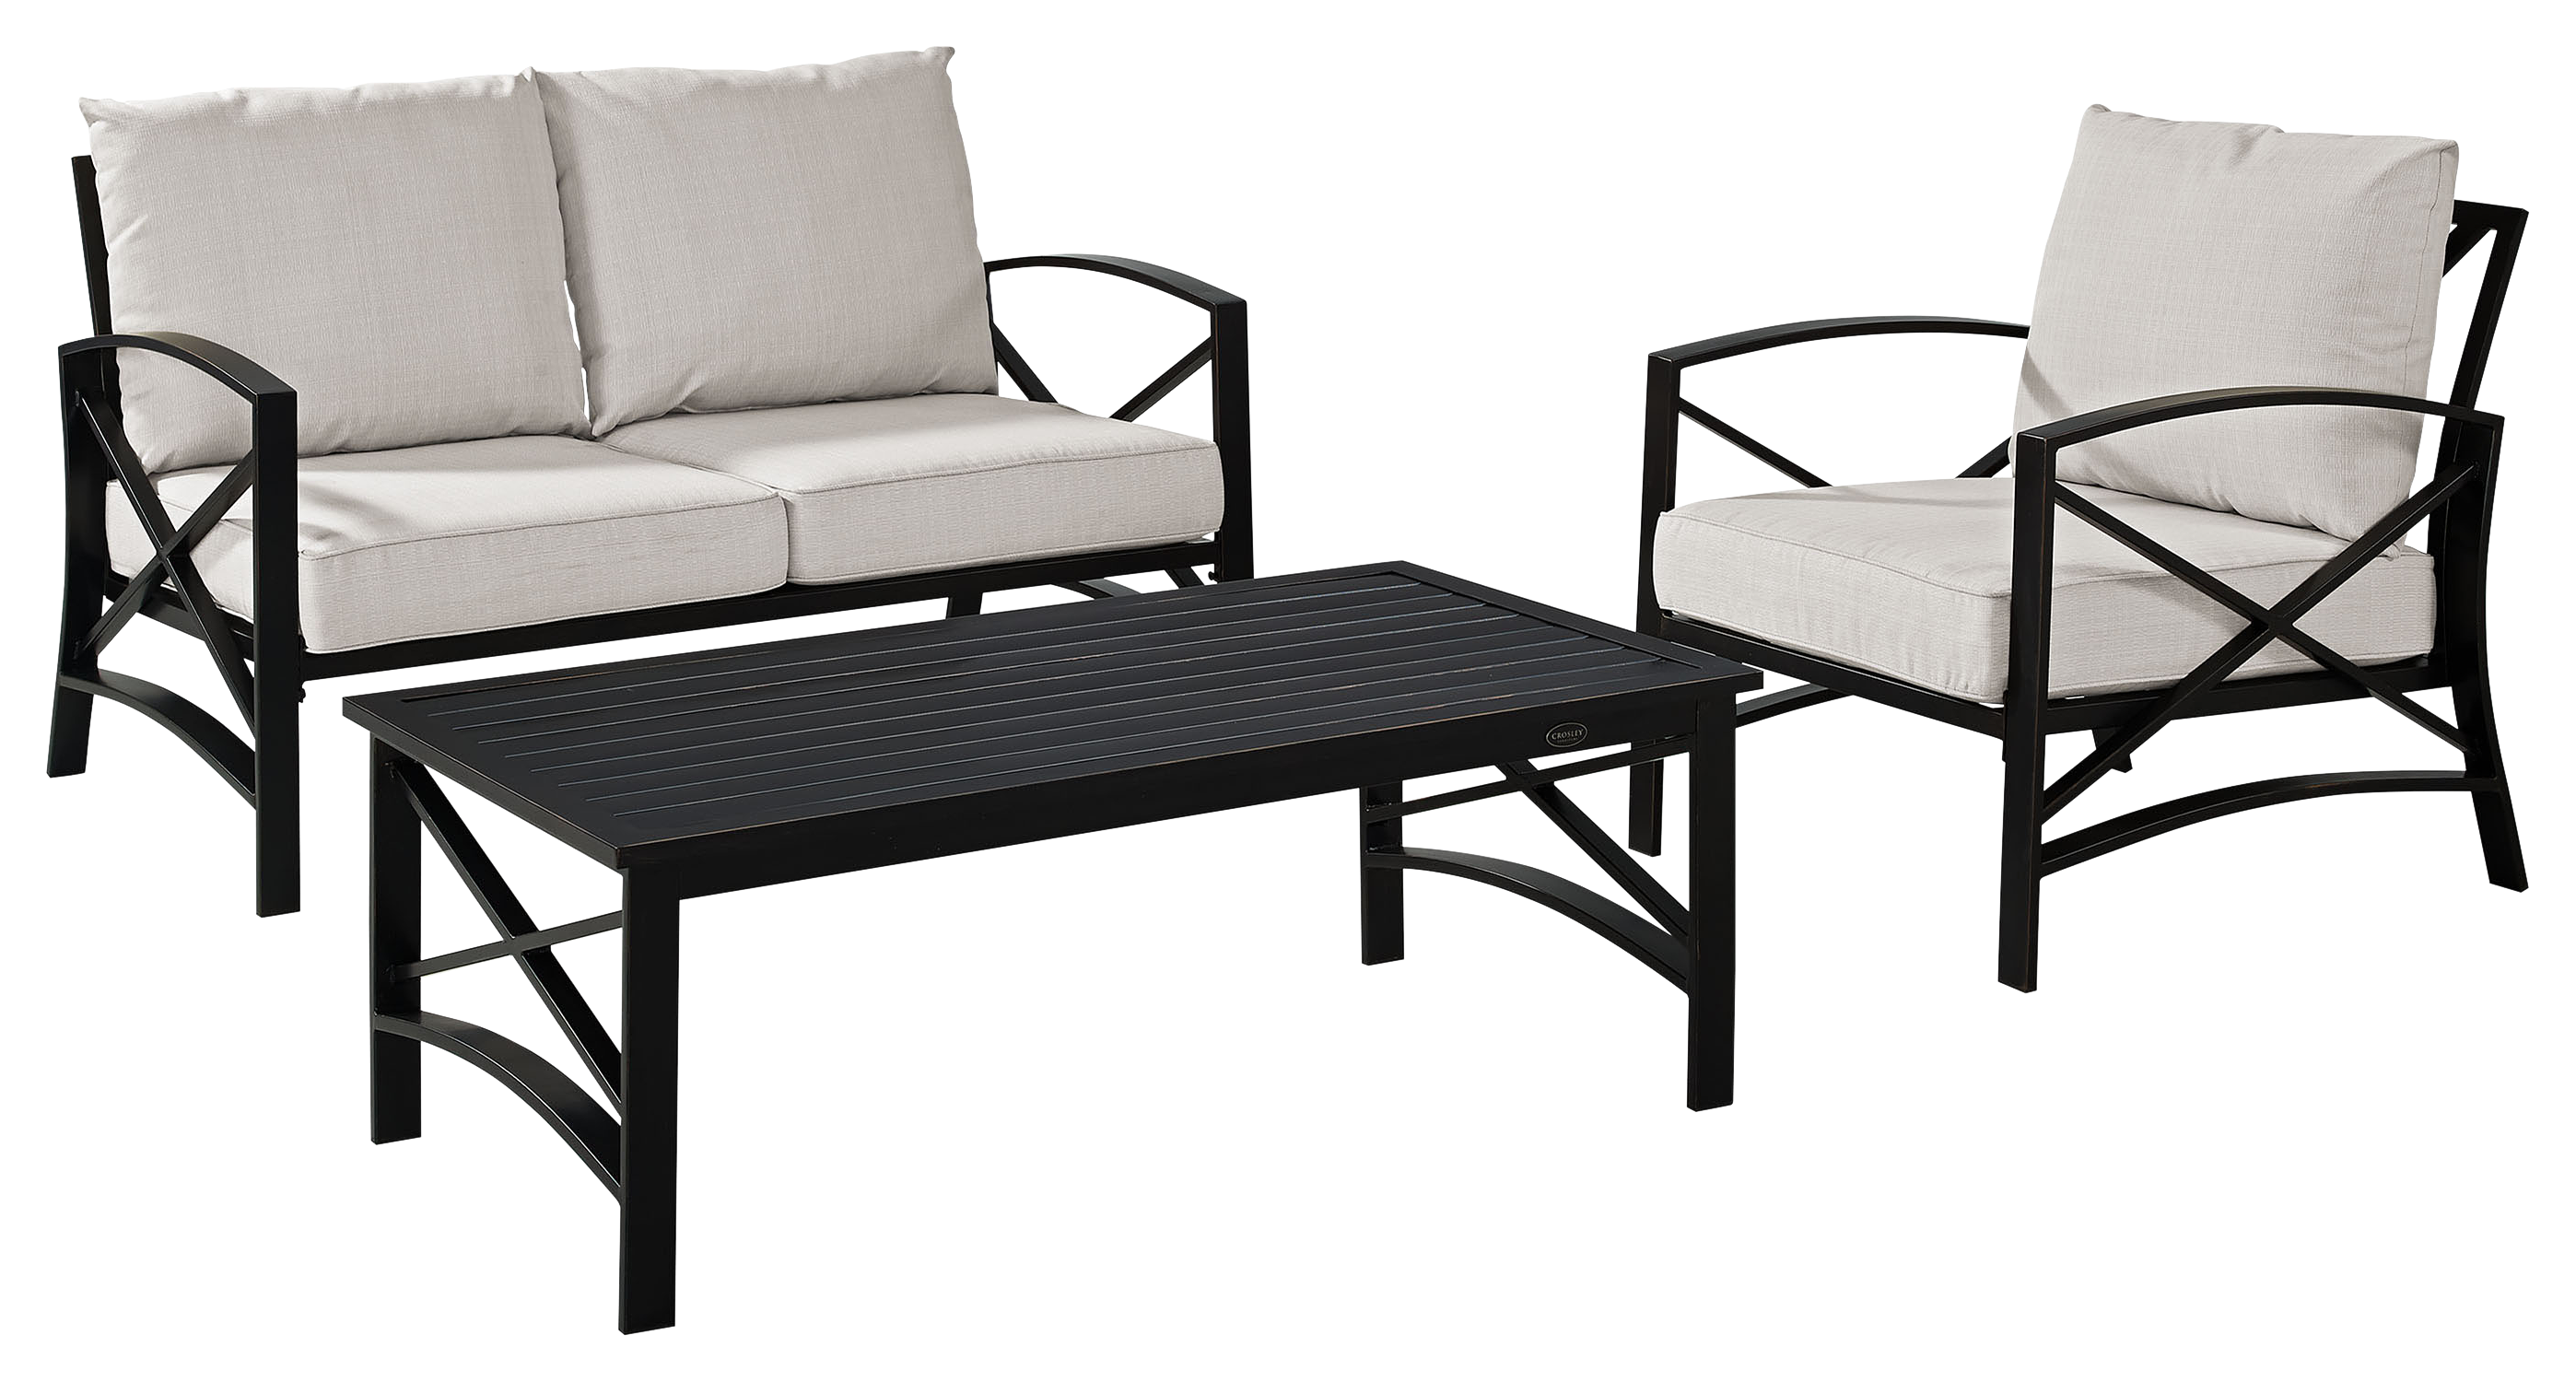 Crosley Kaplan Loveseat, Armchair, And Coffee Table 3 Piece Outdoor Metal Patio Furniture Set Oatmeal/oil Rubbed Bronze